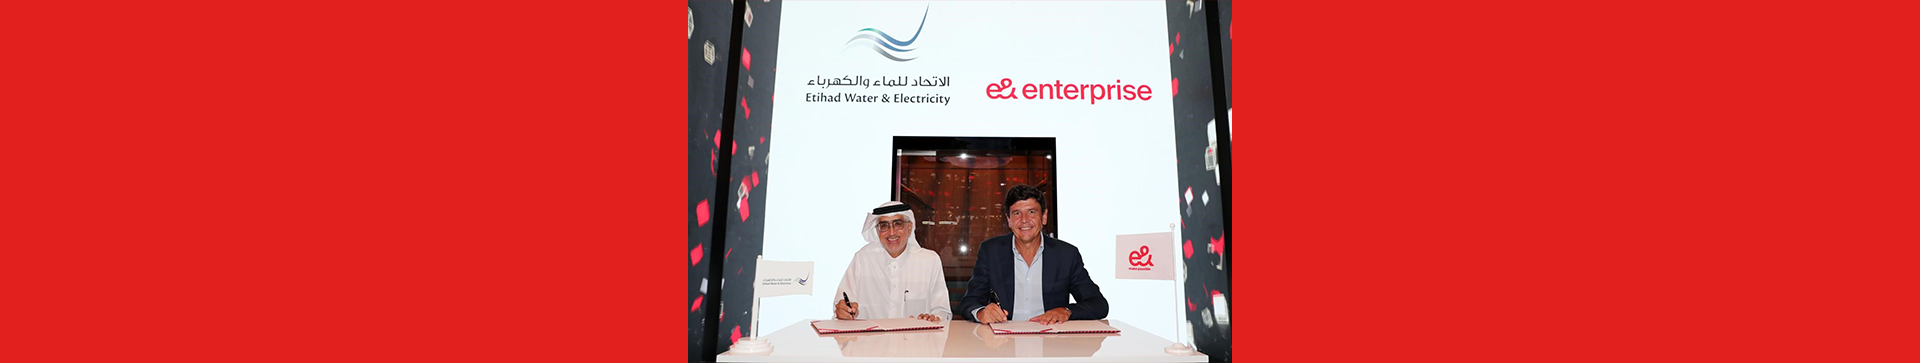 eand-enterprise-enters-5-year-with-etihad-water-1920x363